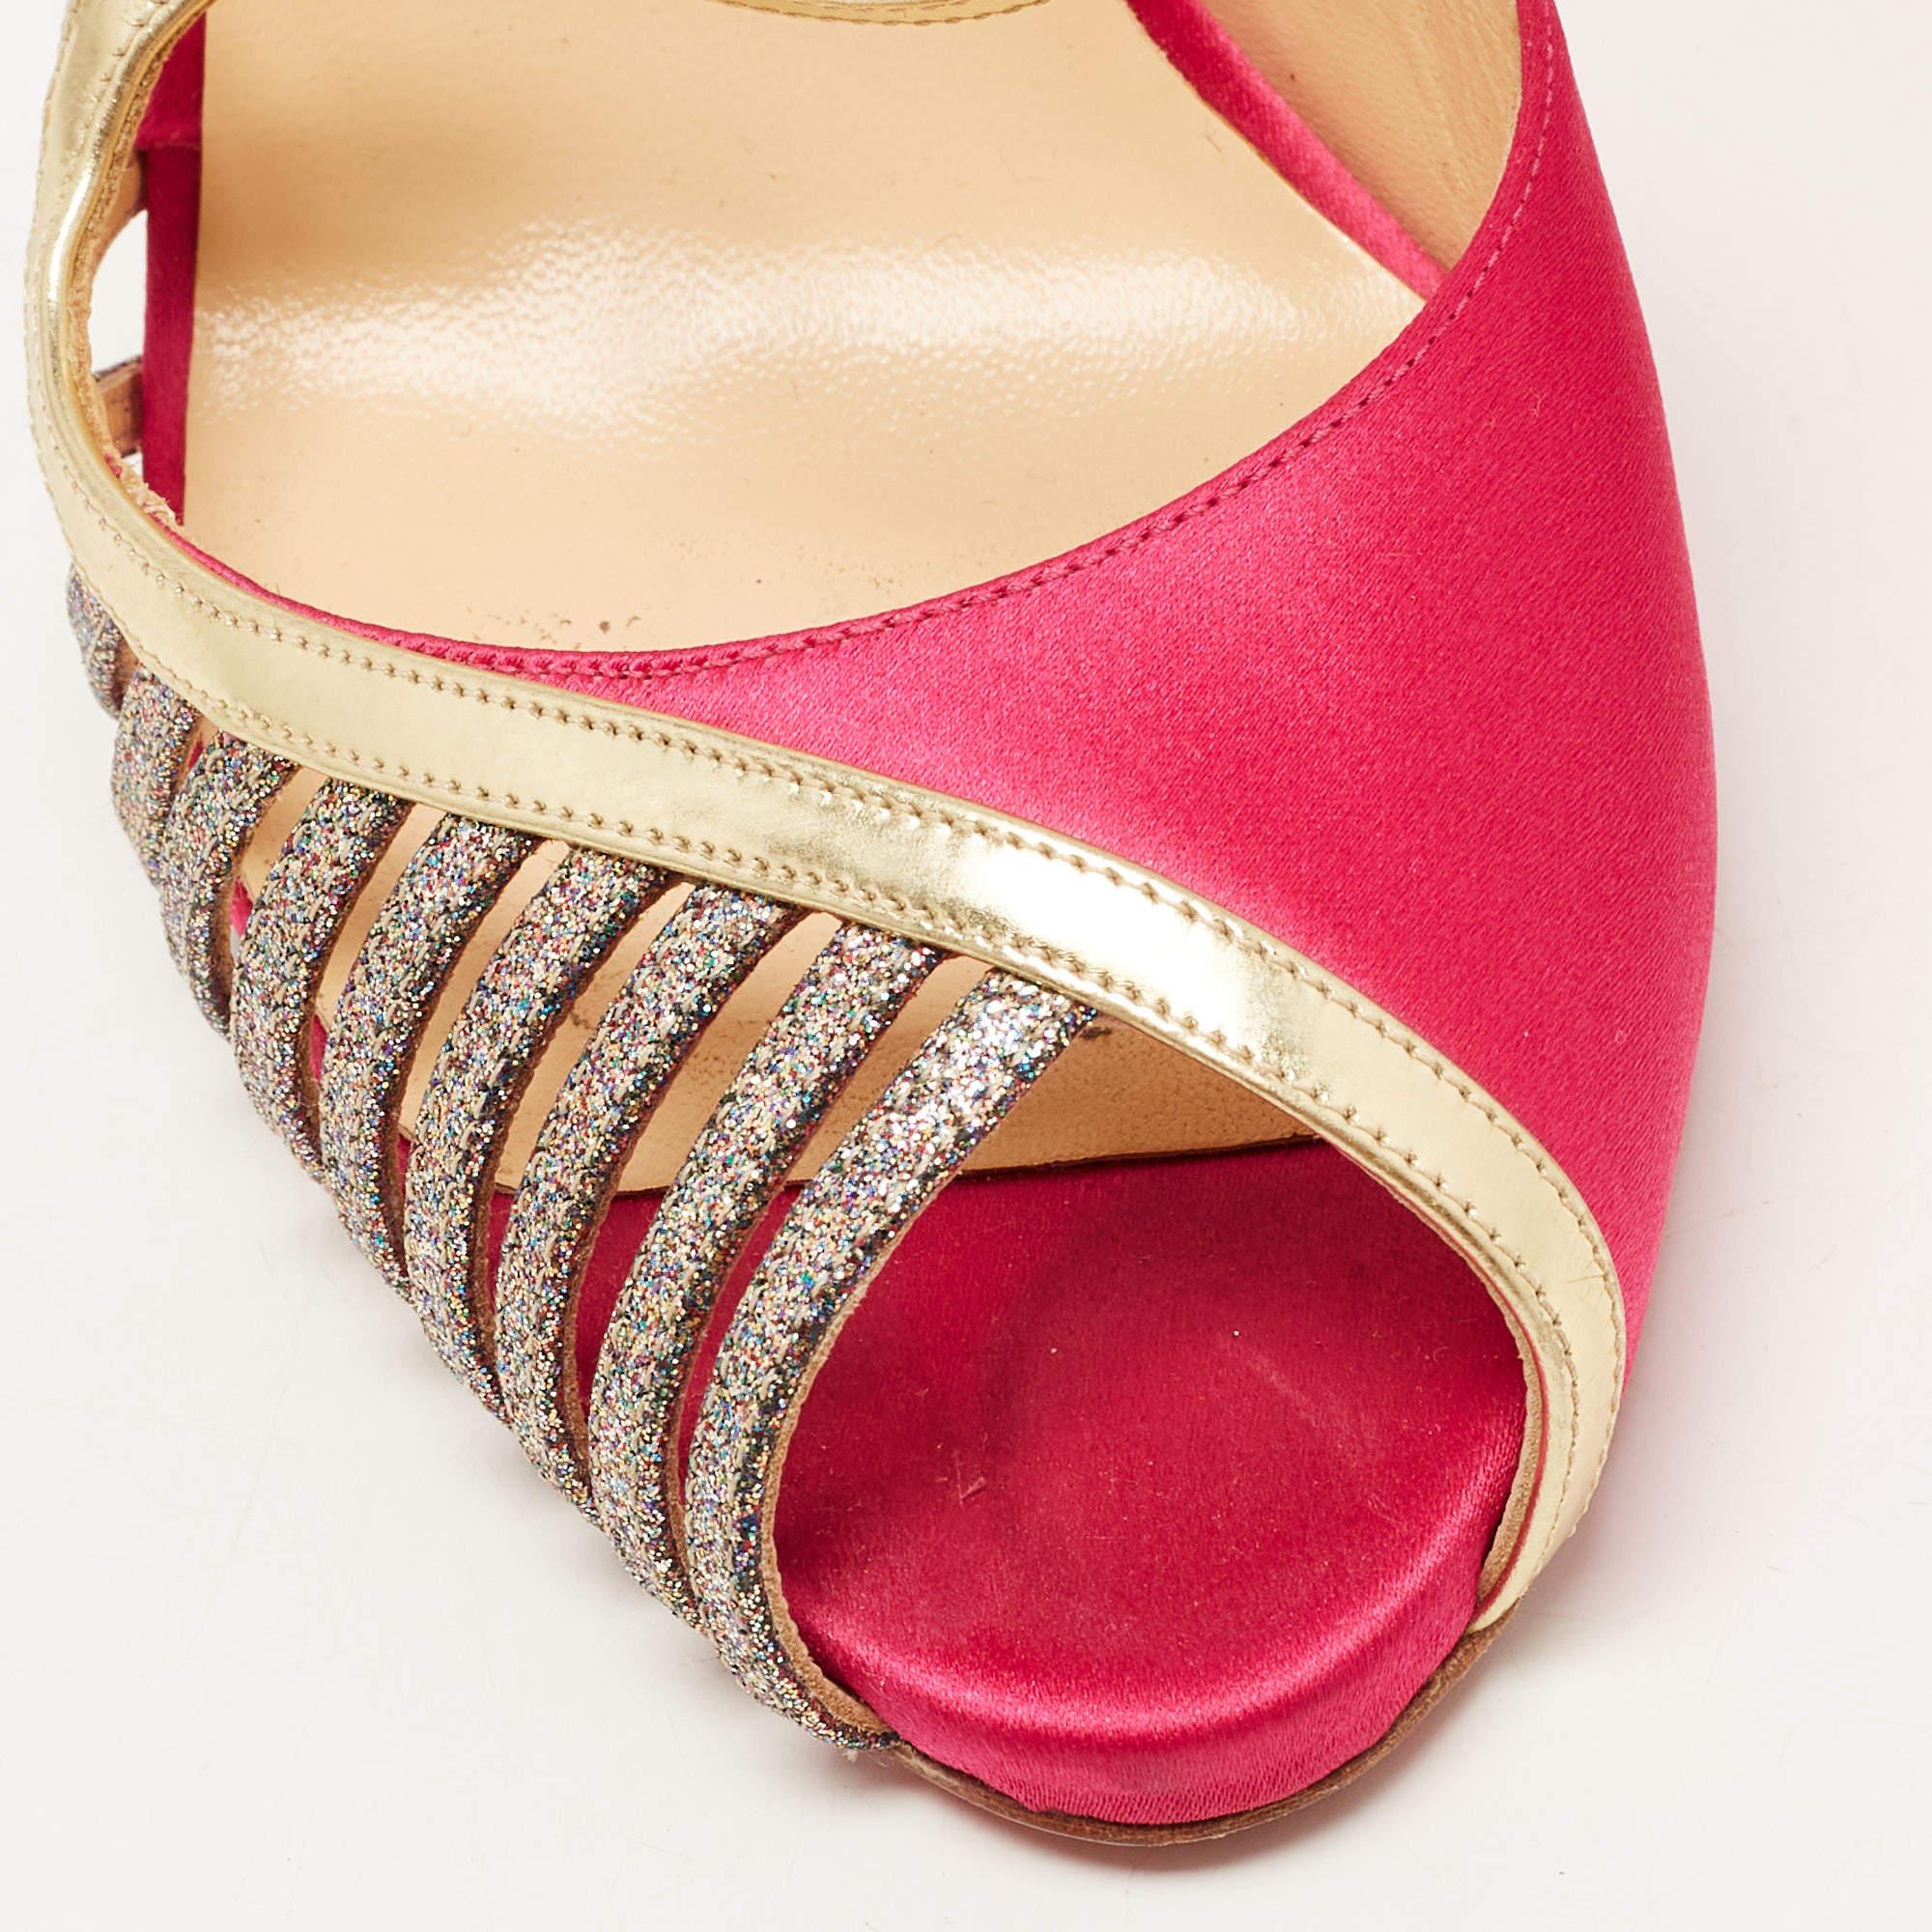 Christian Louboutin Pink/Gold Satin, Leather and Glitter Strappy Sandals Size 39 2